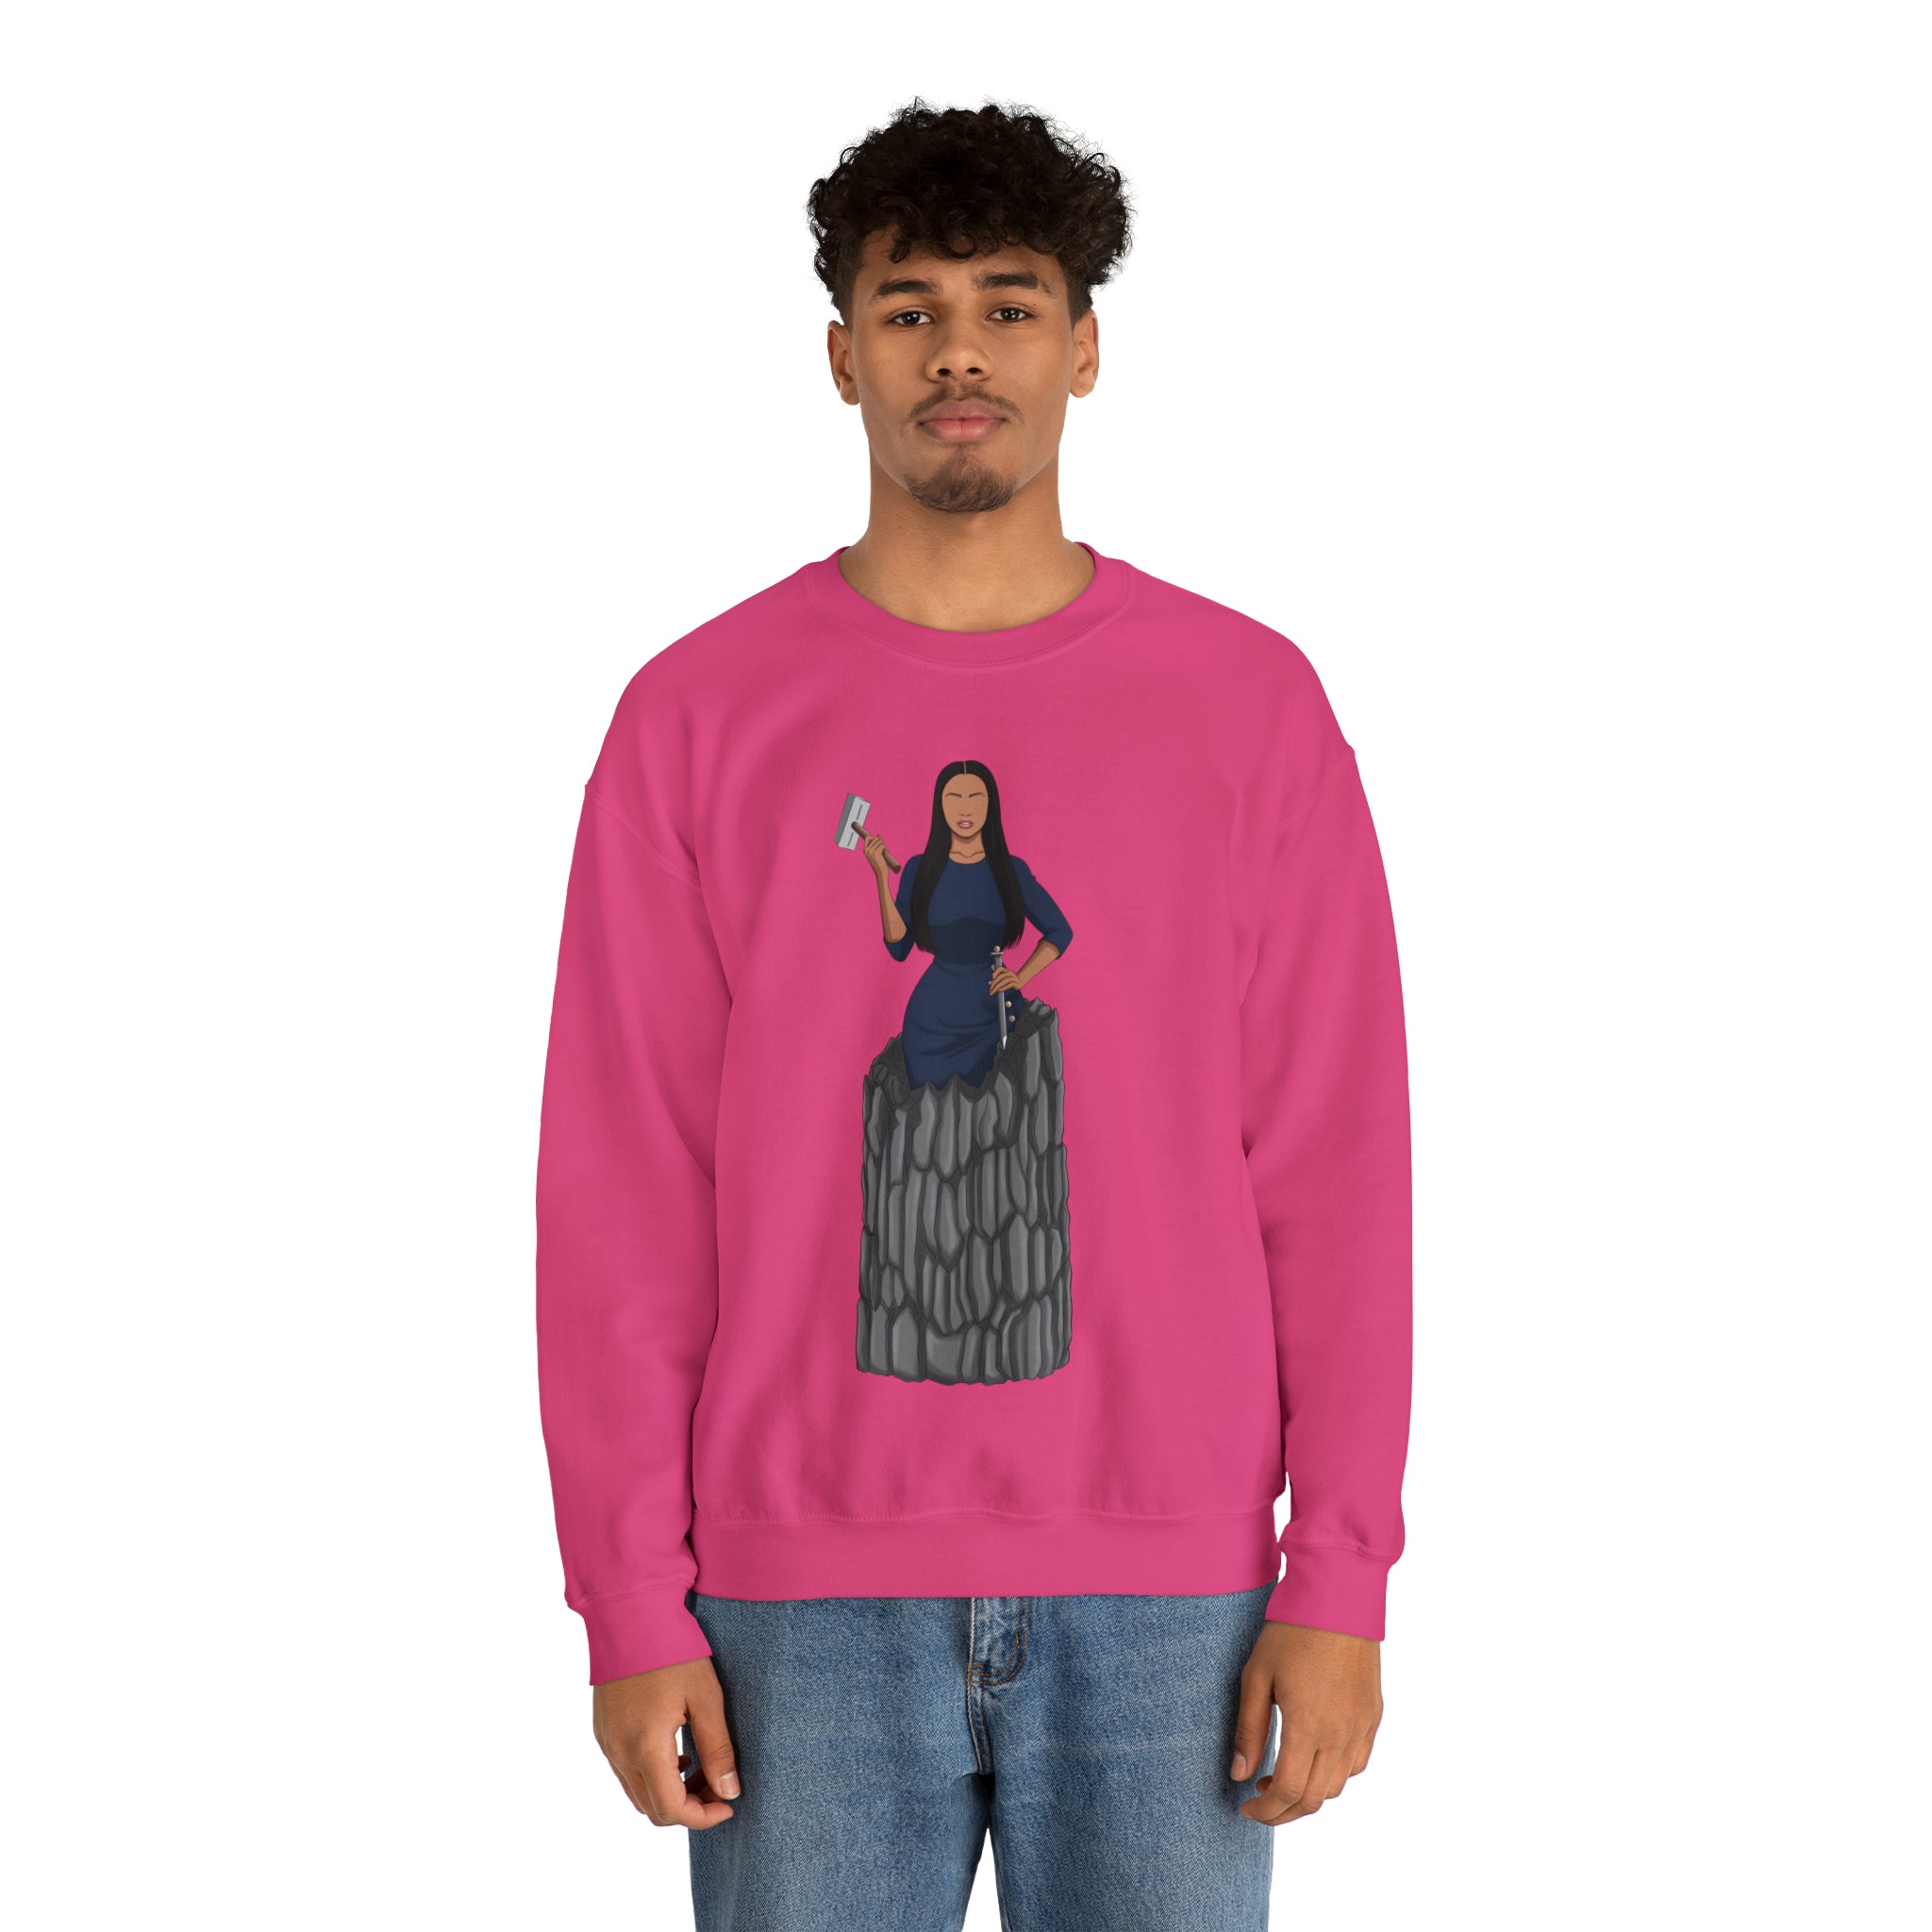 A person working hard to better his/herself - Self-Made Sweatshirt Heavy Blend™ Crewneck - woman #9 - Breakthrough Collection